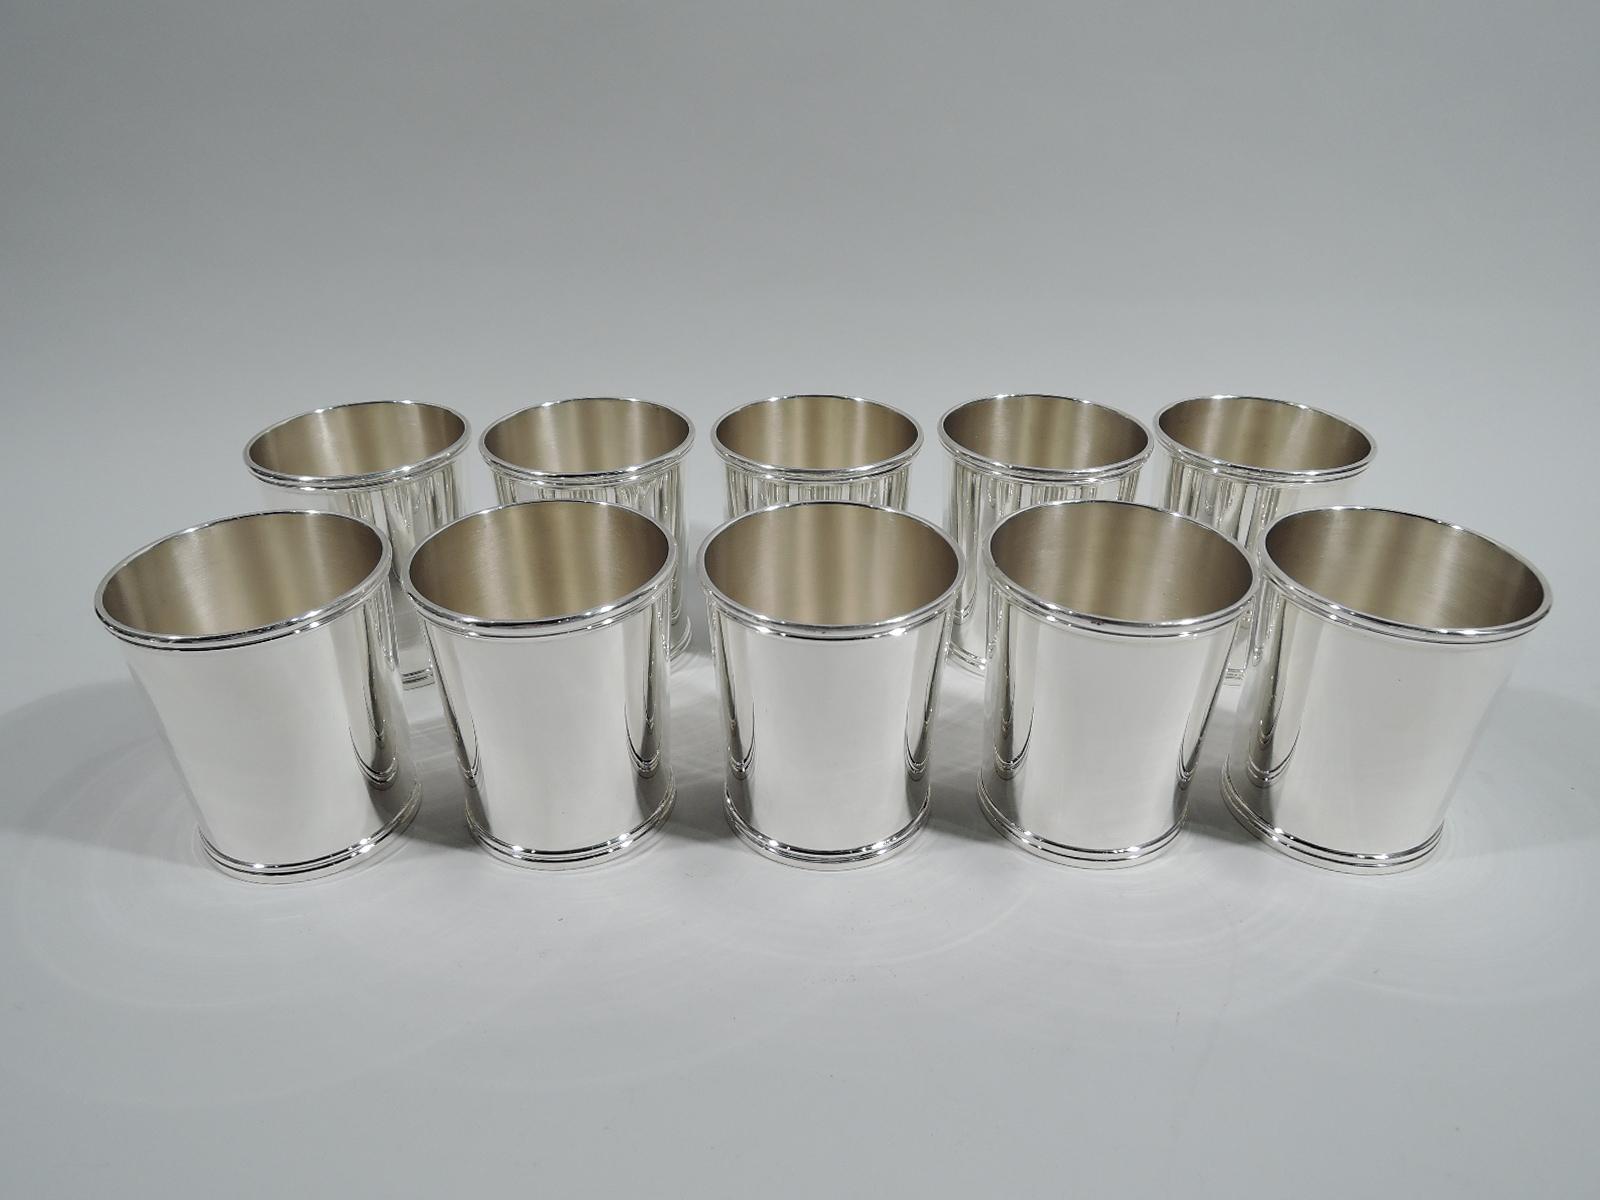 Ten sterling silver mint juleps. Made by Chicago Silver Company. Each: Straight and tapering sides and molded rim and base. A stylish set by a noted regional maker that was active from 1925-50. Fully marked and numbered 351. Total weight: 45 troy